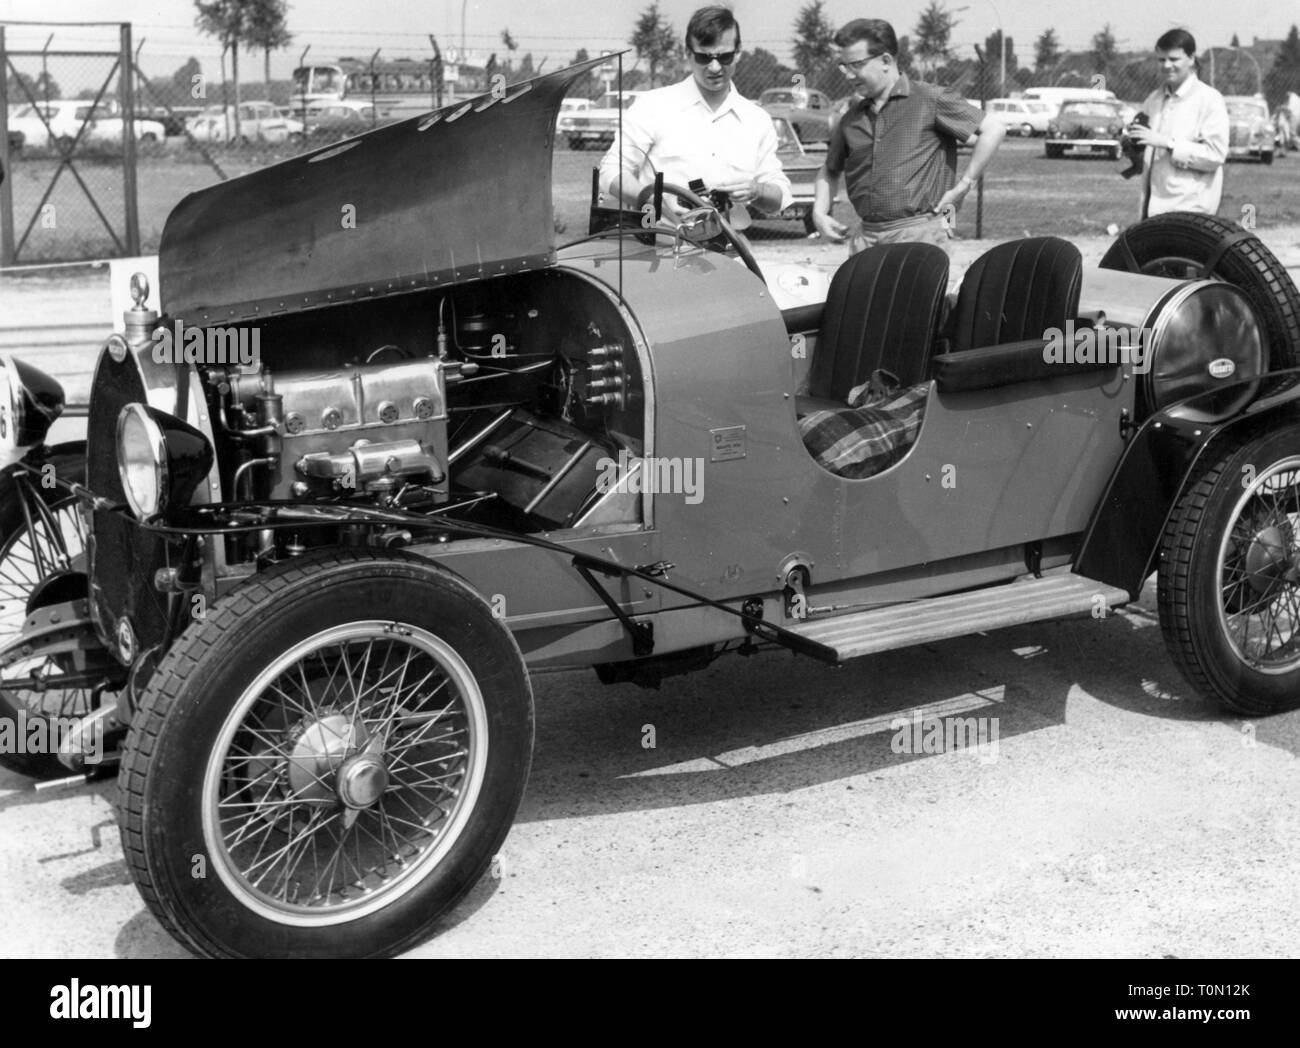 transport / transportation, car, type, Bugatti type 35, year of construction: 1924, view from left, open engine bonnet, 11th international Schnauferl-Rallye, Berlin 9.6. - 23.6.1966, racer, racers, racing car, racing cars, touring car, touring cars, twoseater, vintage car, vintage cars, veteran car rally, Italy, motor car, auto, automobile, passenger car, motorcar, motorcars, autos, automobiles, passenger cars, Germany, 1960s, 60s, 1920s, 20s, 20th century, people, men, man, male, transport, transportation, car, cars, type, types, view, views, en, Additional-Rights-Clearance-Info-Not-Available Stock Photo